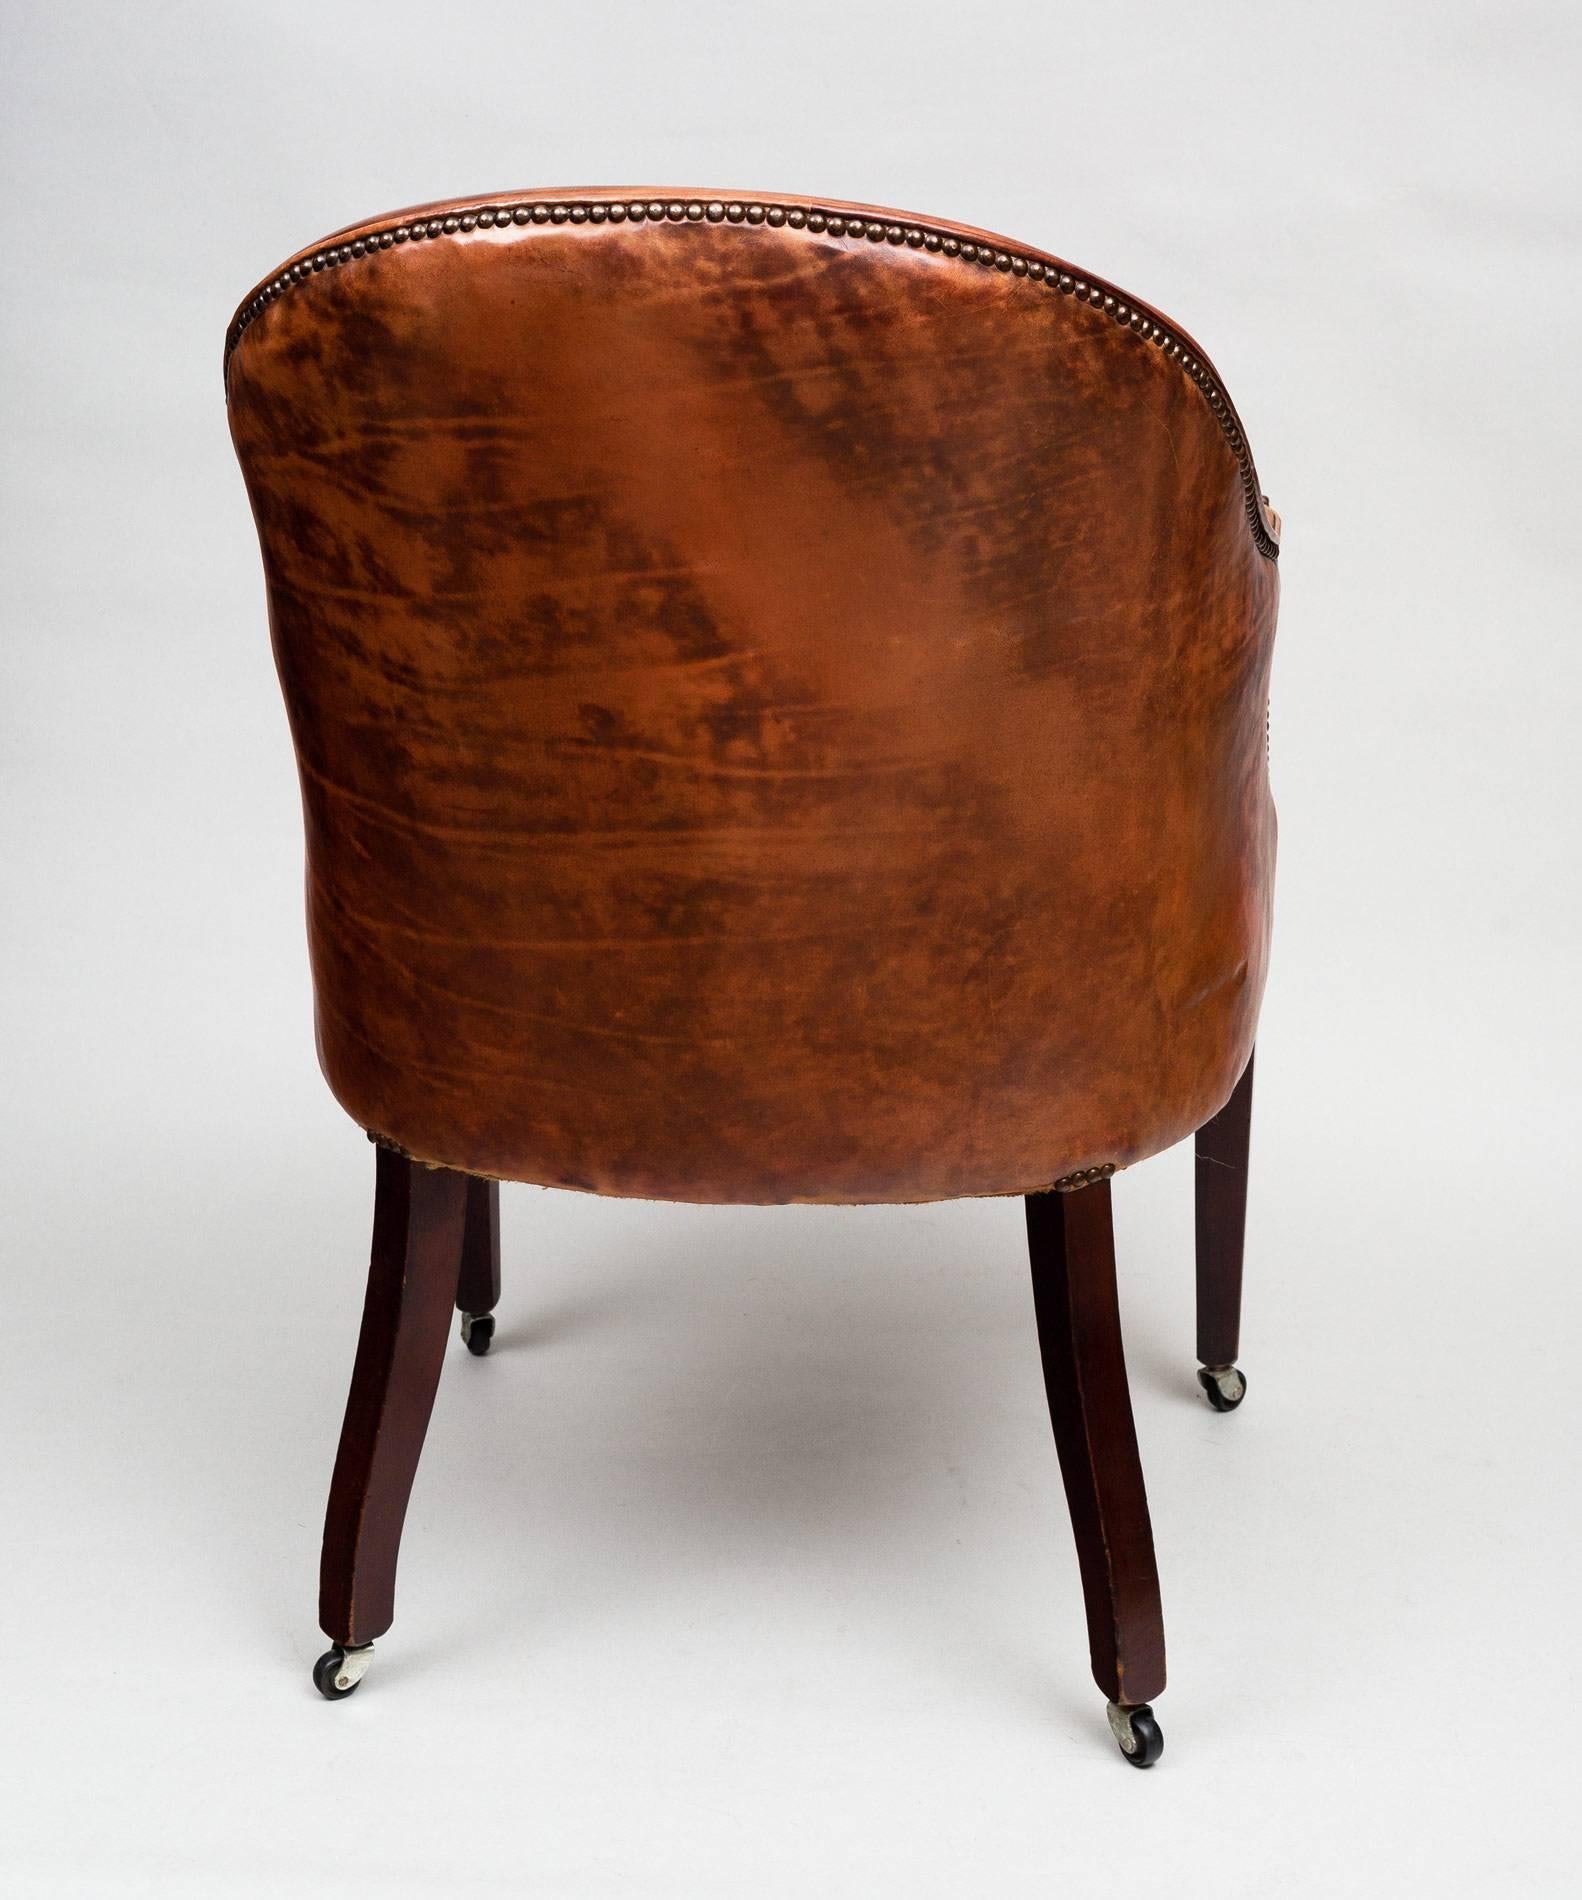 English Edwardian Leather Tub Chair For Sale